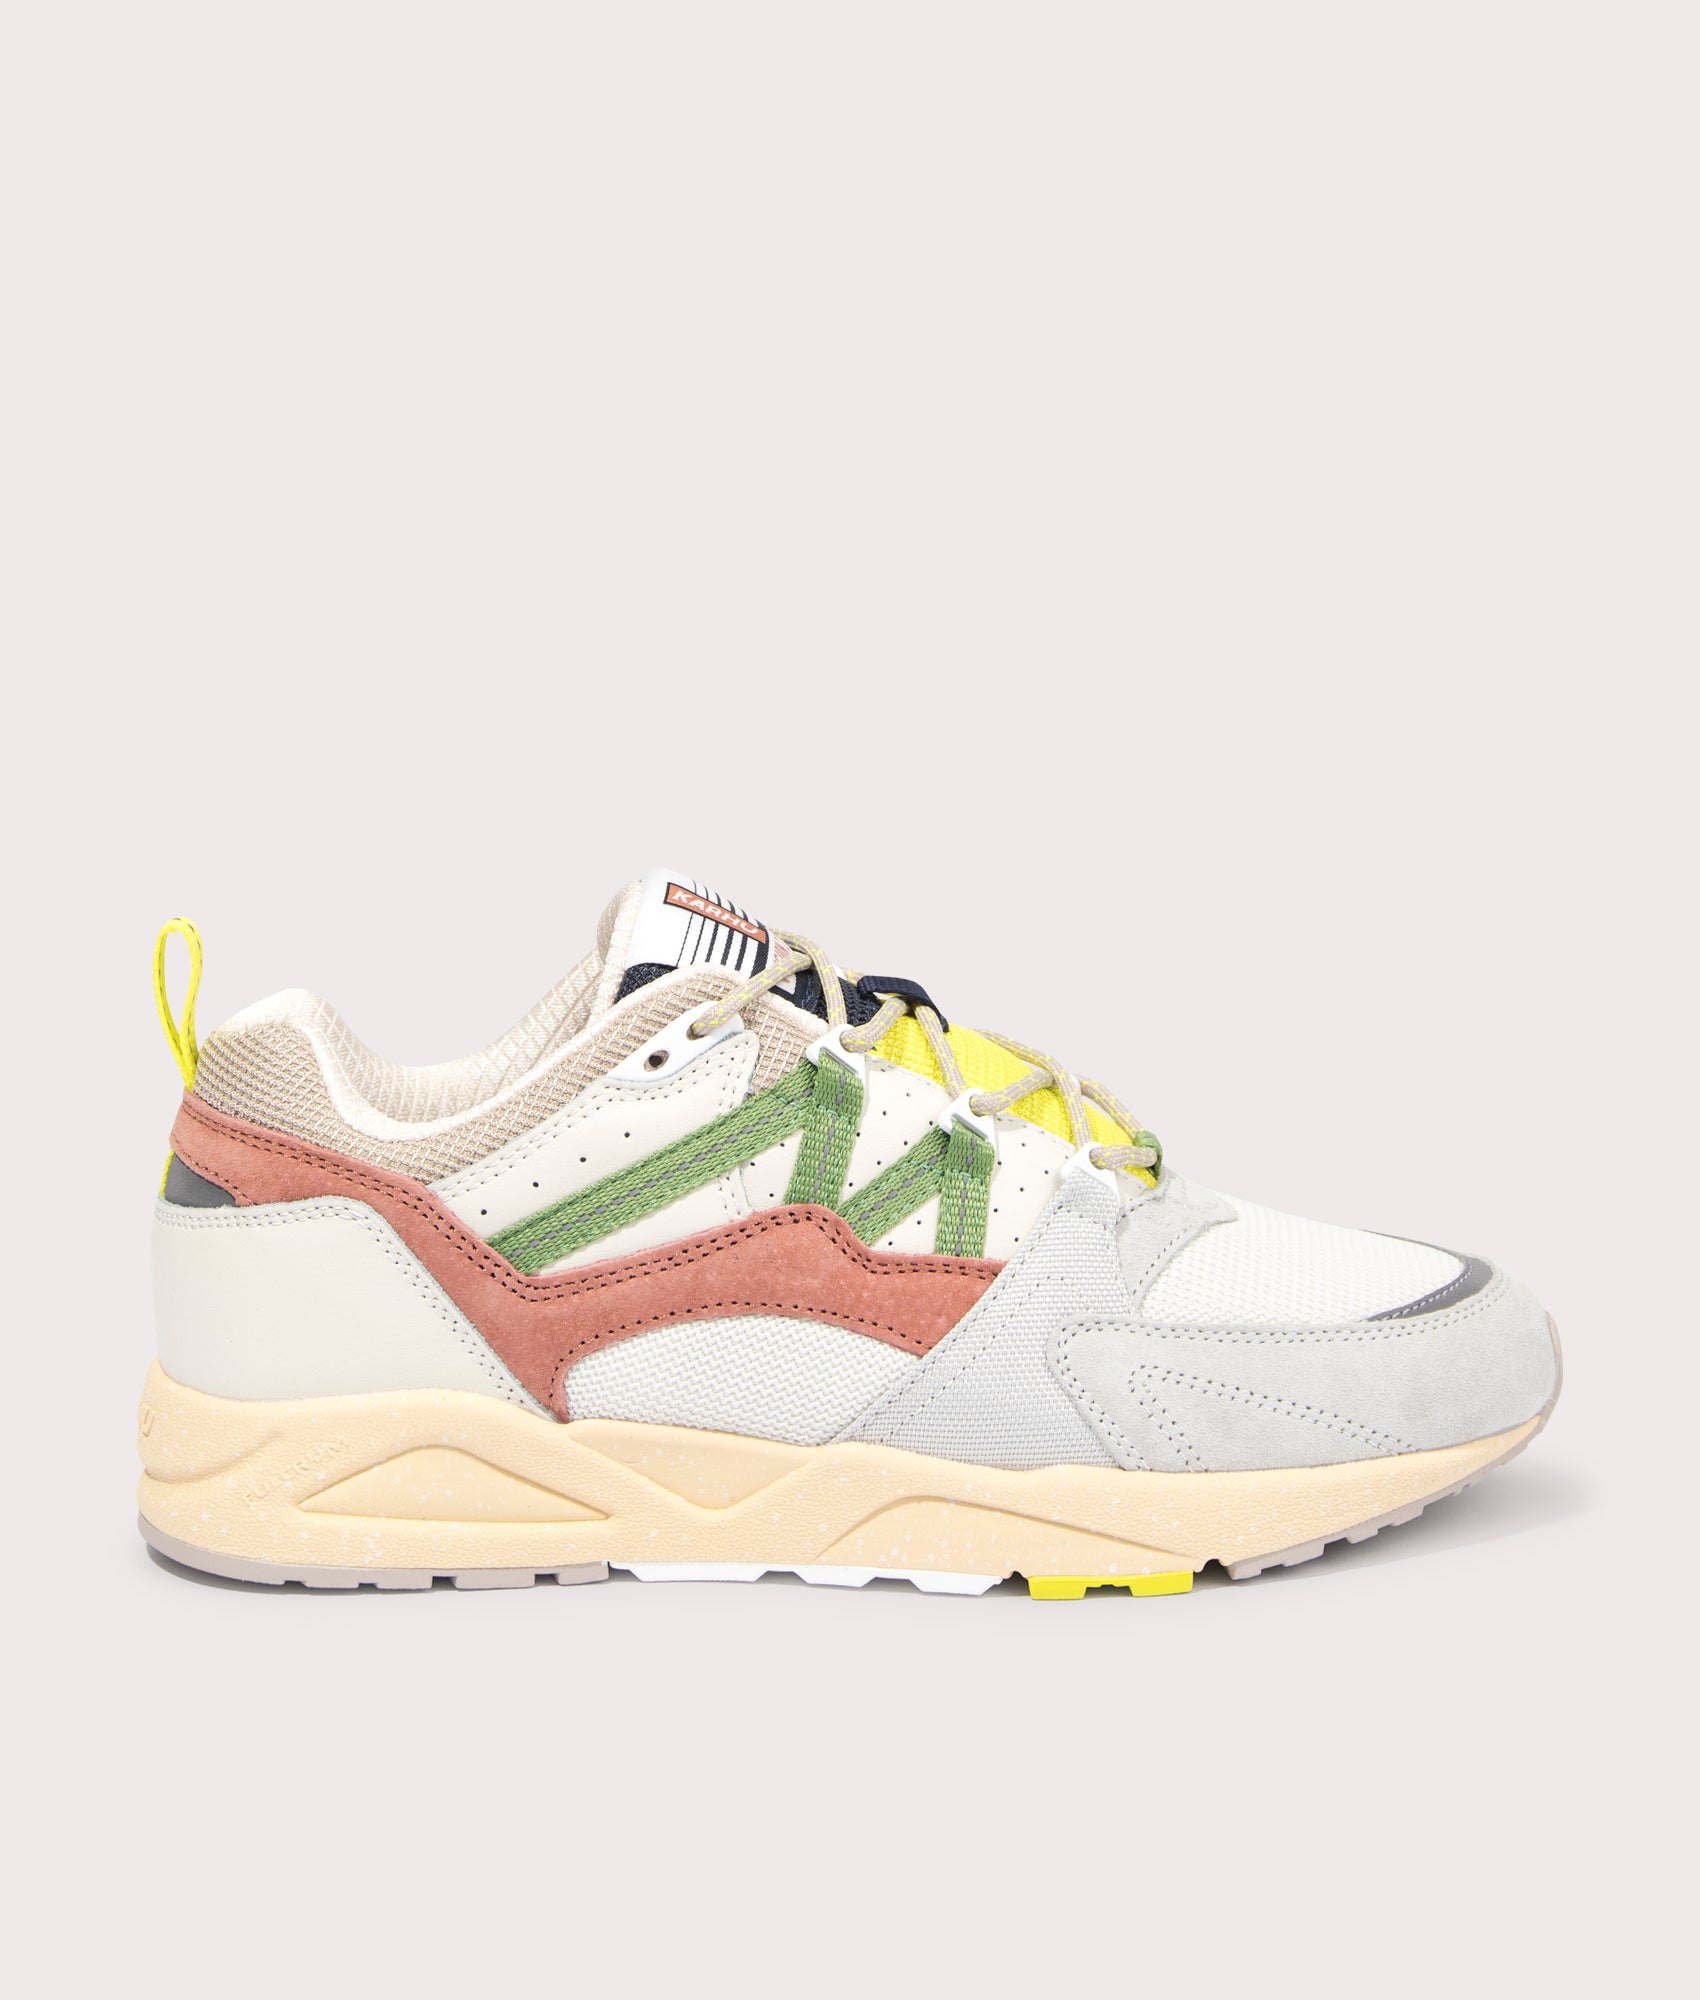 Karhu Mens Fusion 2.0 Sneakers - Colour: Lily White/Piquant Green - Size: 8